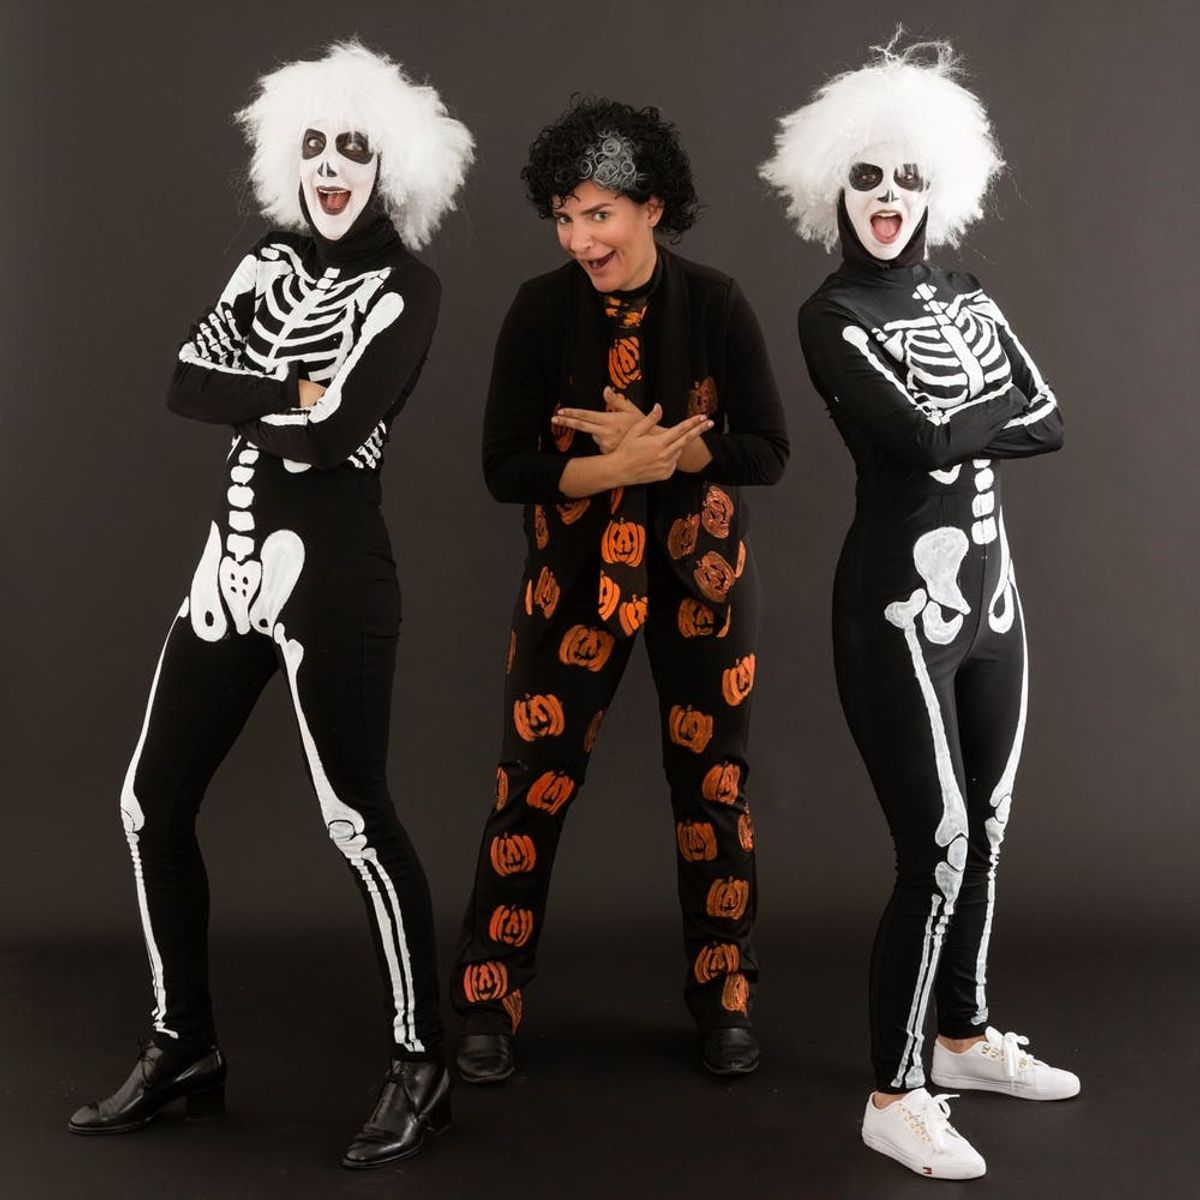 Get Your Funky DIY on With This David S. Pumpkins Group Halloween Costume